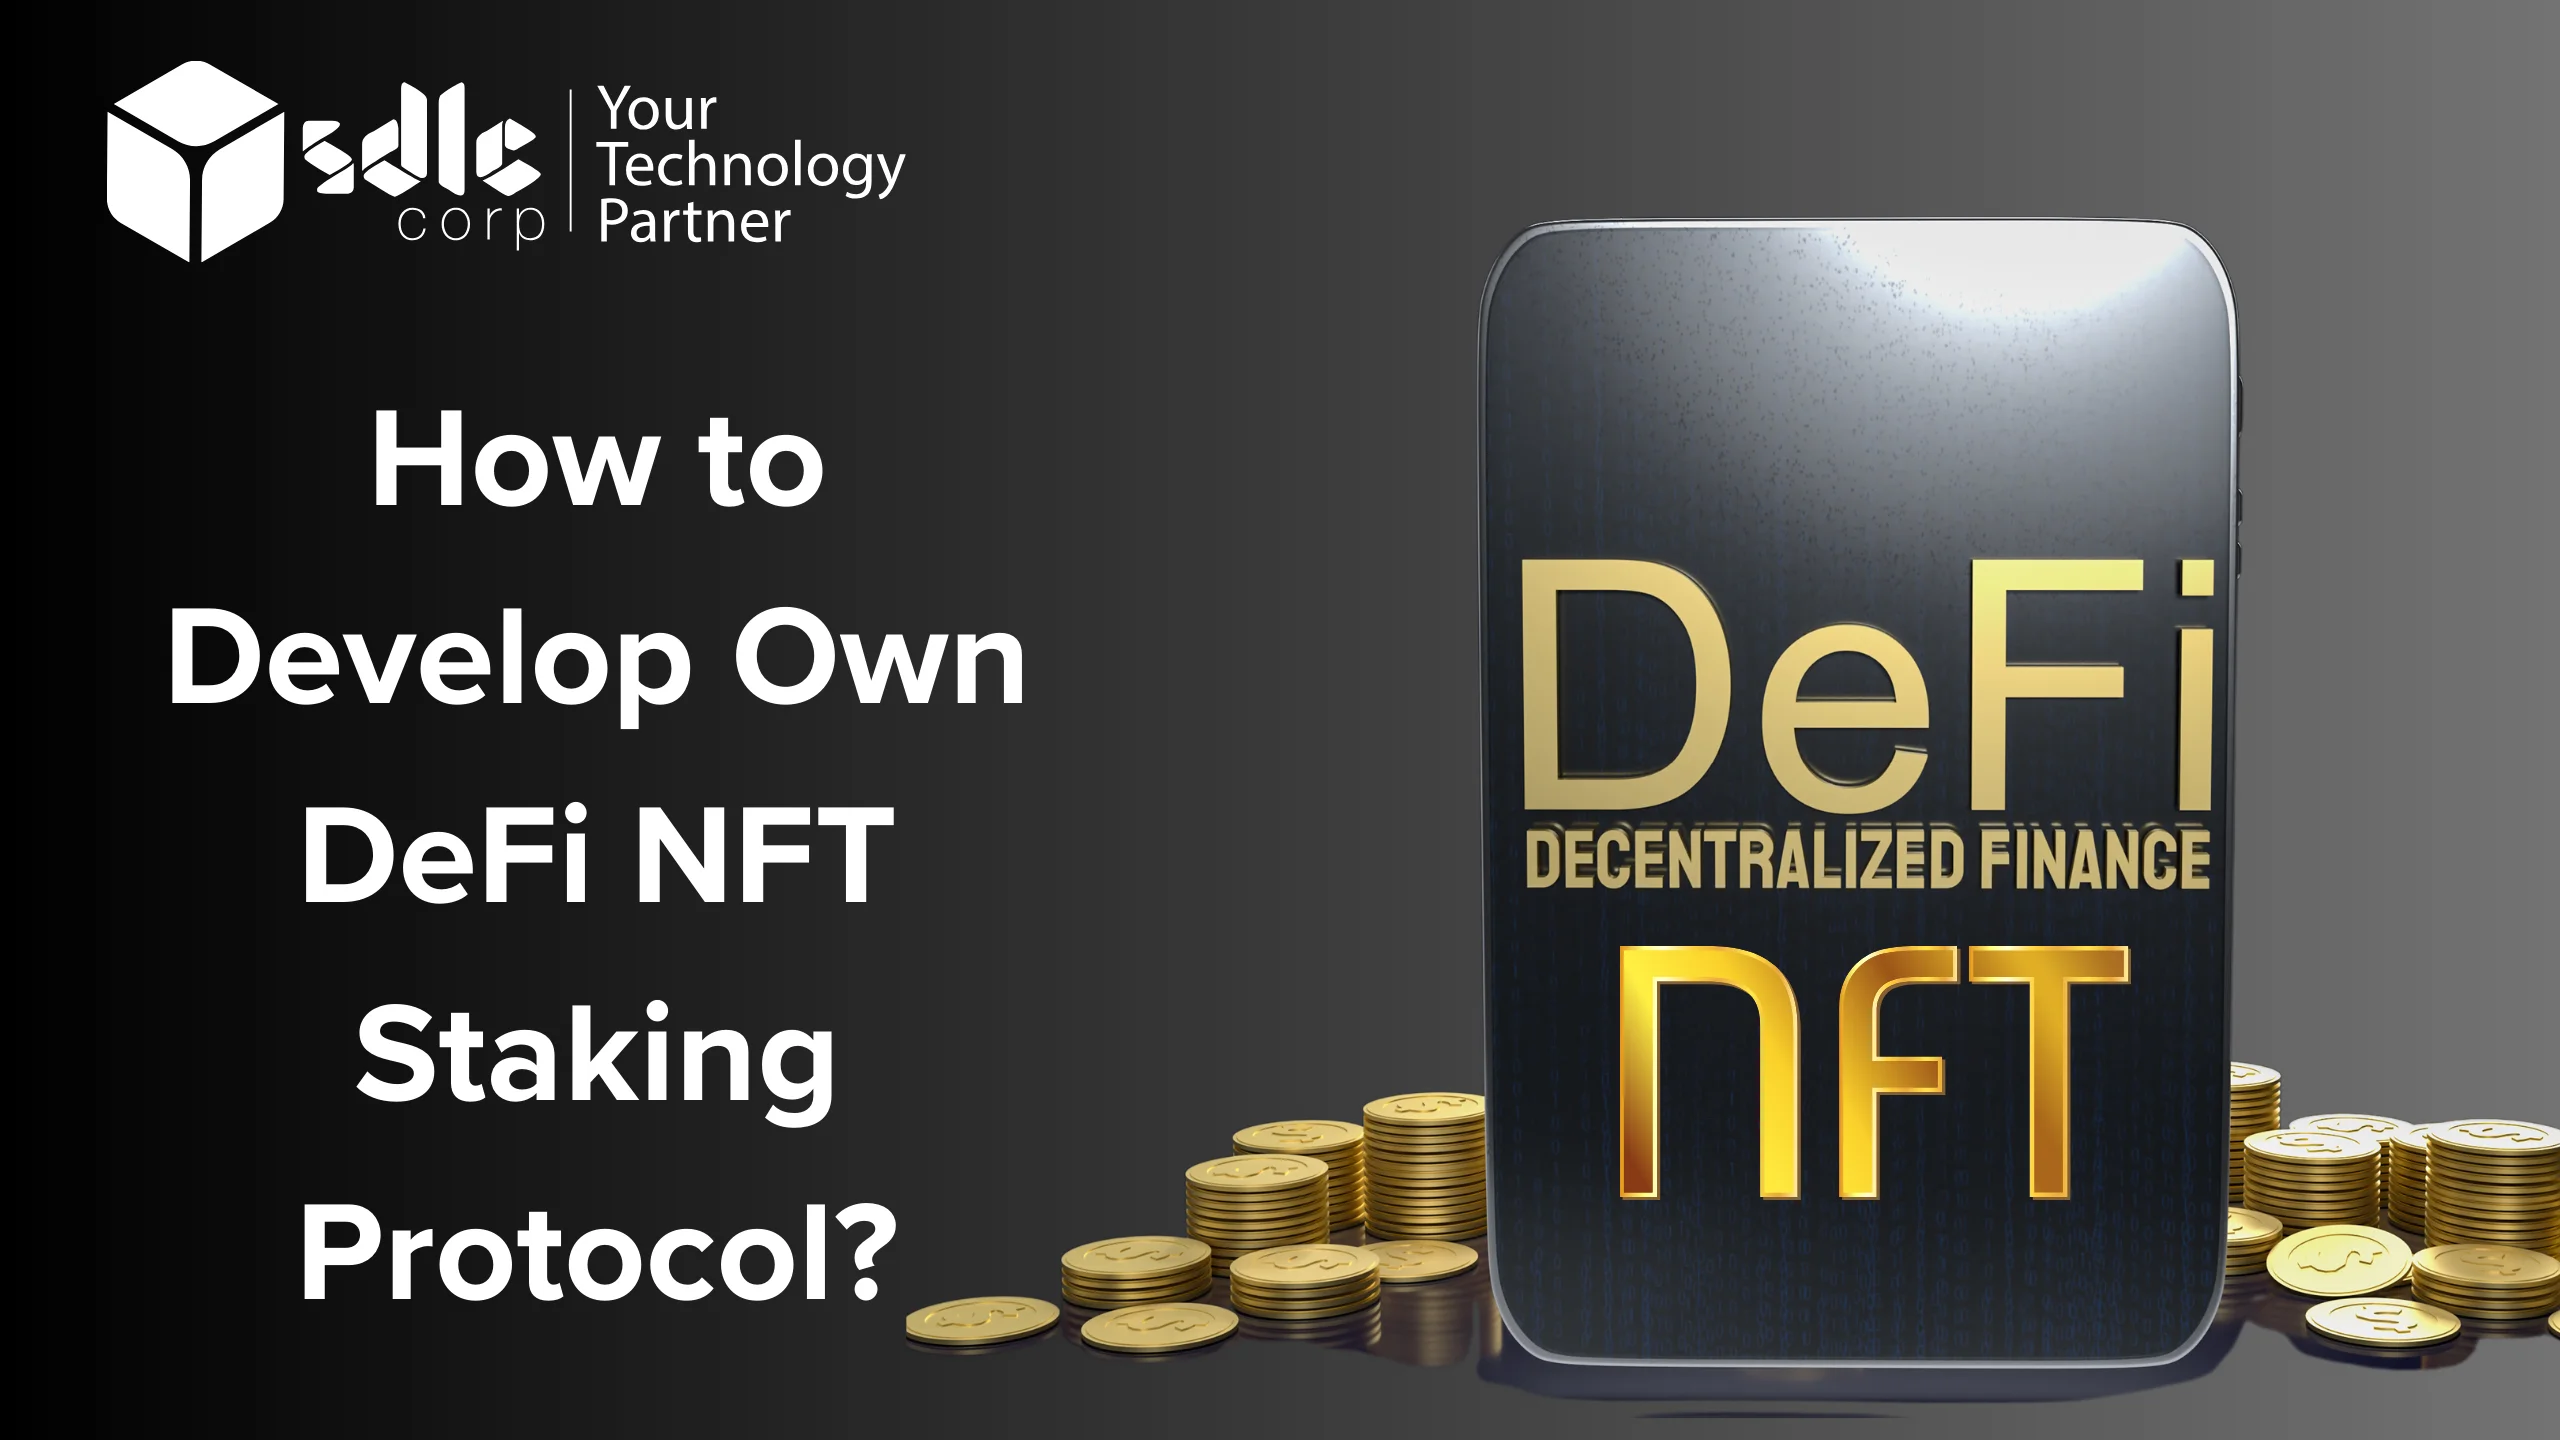 How-to-Develop-Own-DeFi-NFT-Staking-Protocol.webp